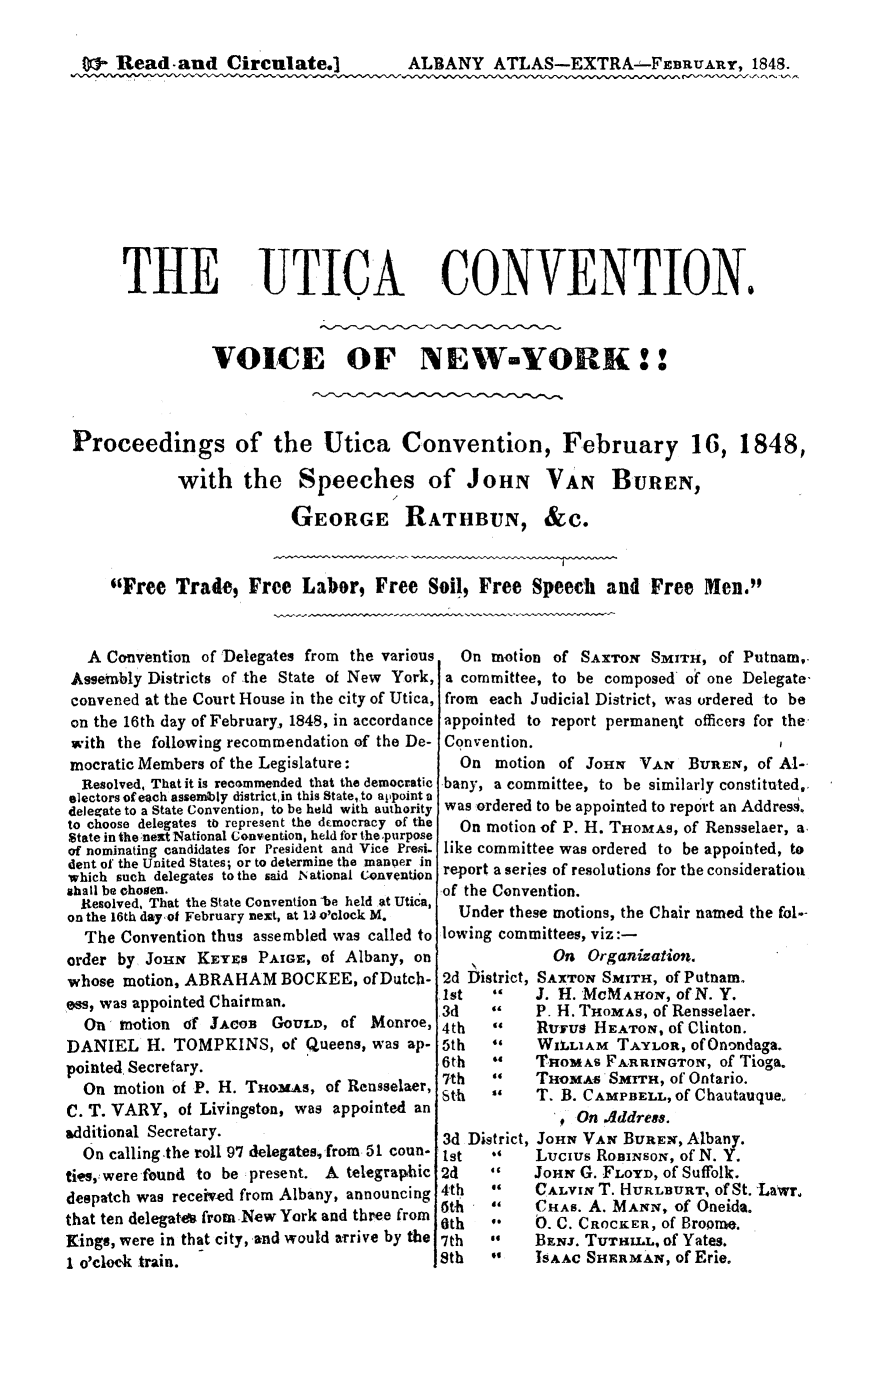 handle is hein.newyork/uticonve0001 and id is 1 raw text is: 

Read-and Circulate.]   ALBANY ATLAS-EXTRA-FBRUARY, 1848.


THE


UTICA


CONVENTION.


                VOICE OF NEWV-YORK!



Proceedings of the Utica Convention, February 16, 1848,

            with the Speeches of JOHN VAN B UREN,

                         GEORGE RATHBUN, &C.


    Free Trade, Free Labor, Free Soil, Free Speech and Free Men.


  A Convention of Delegates from the various
  Assembly Districts of the State of New York,
  convened at the Court House in the city of Utica,
  on the 16th day of February, 1848, in accordance
  with the following recommendation of the De-
  mocratic Members of the Legislature:
  Resolved, That it is recommended that the democratic
electors of each assembly districtin this State,,to appoint a
delegate to a State Convention, to be hld with authority
to choose delegates to represent the dtmocracy of the
State in the :next National Convention, held for the purpose
of nominating candidates for President and Vice Presi.
dent of the United States; or to determine the manper in
which such delegates to the said National Convention
shall be ohoSen.
  Resolved. That the State Convention -be held at Utica,
on the 16th dayof February next, at 12 o'clock M.
  The Convention thus assembled was called to
order by JOHN KEYES PAIGE, of Albany, on
whose motion, ABRAHAM BOCKEE, of Dutch-
s, was appointed Chairman.
  On  motion Of JAiO   GOULD, of Monroe,
DANIEL H. TOMPKINS, of Queens, was ap-
pointed Secretary.
  On motion of P. H. THomAs, of Rensselaer,
C. T. VARY, of Livingston, was appointed an
additional Secretary.
  On calling-the roll 97 delegates, from 51 coun-
ties, were found to be present. A telegraphic
despatch was received from Albany, announcing
that ten delegate% fromNew York and three from
Kings, were in that city, and would aTrive by the
1 o'clock train.


  On motion of SAXTON SMITH, of Putnam,
  a committee, to be composed o one Delegate-
  from each Judicial District, was ordered to be
appointed to report permanertt officers for the
Convention.
  On motion of JoHN    VAz BUREN, of Al-
bany, a committee, to be similarly constituted,
was ordered to be appointed to report an Addres.
  On motion of P. H. THOMAS, of Rensselaer, a
like committee was ordered to be appointed, to
report a series of resolutions for the considerationt
of the Convention.
  Under these motions, the Chair named the fol--
lowing committees, viz:-


2d District,
Ist   
3d
4th
5th
6th
7th   
Sth   

3d District,
Ist   
2d    
4th   
6th   
Oth
7th   
8th   


  On Organization.
SAXTON SMITH, of Putnam.
J. H. MCMAHON, of N. Y.
P. H. THOMAS, of Rensselaer.
RUFus HEATON, of Clinton.
WIL1AM TAYLOR, of Onondaga.
THOMAS FA-RRINGTON, of Tioga.
THOMAS SMrrH, of Ontario.
T. B. CAMPBELL, of Chautauqueo
  I On .Address.
JOHN VAN BUREx, Albany.
Lucius ROBINSON, of N. Y.
JOHN G. FLOYD, of Suffolk.
CALVIN T. HURLBURT, of St. Lawr.
CHAS. A. MANN, of Oneida.
0. C. CROCKER, of Broome.
BzNj. TUTHILL, of Yates.
ISAAC SHERMAN, of Erie.


